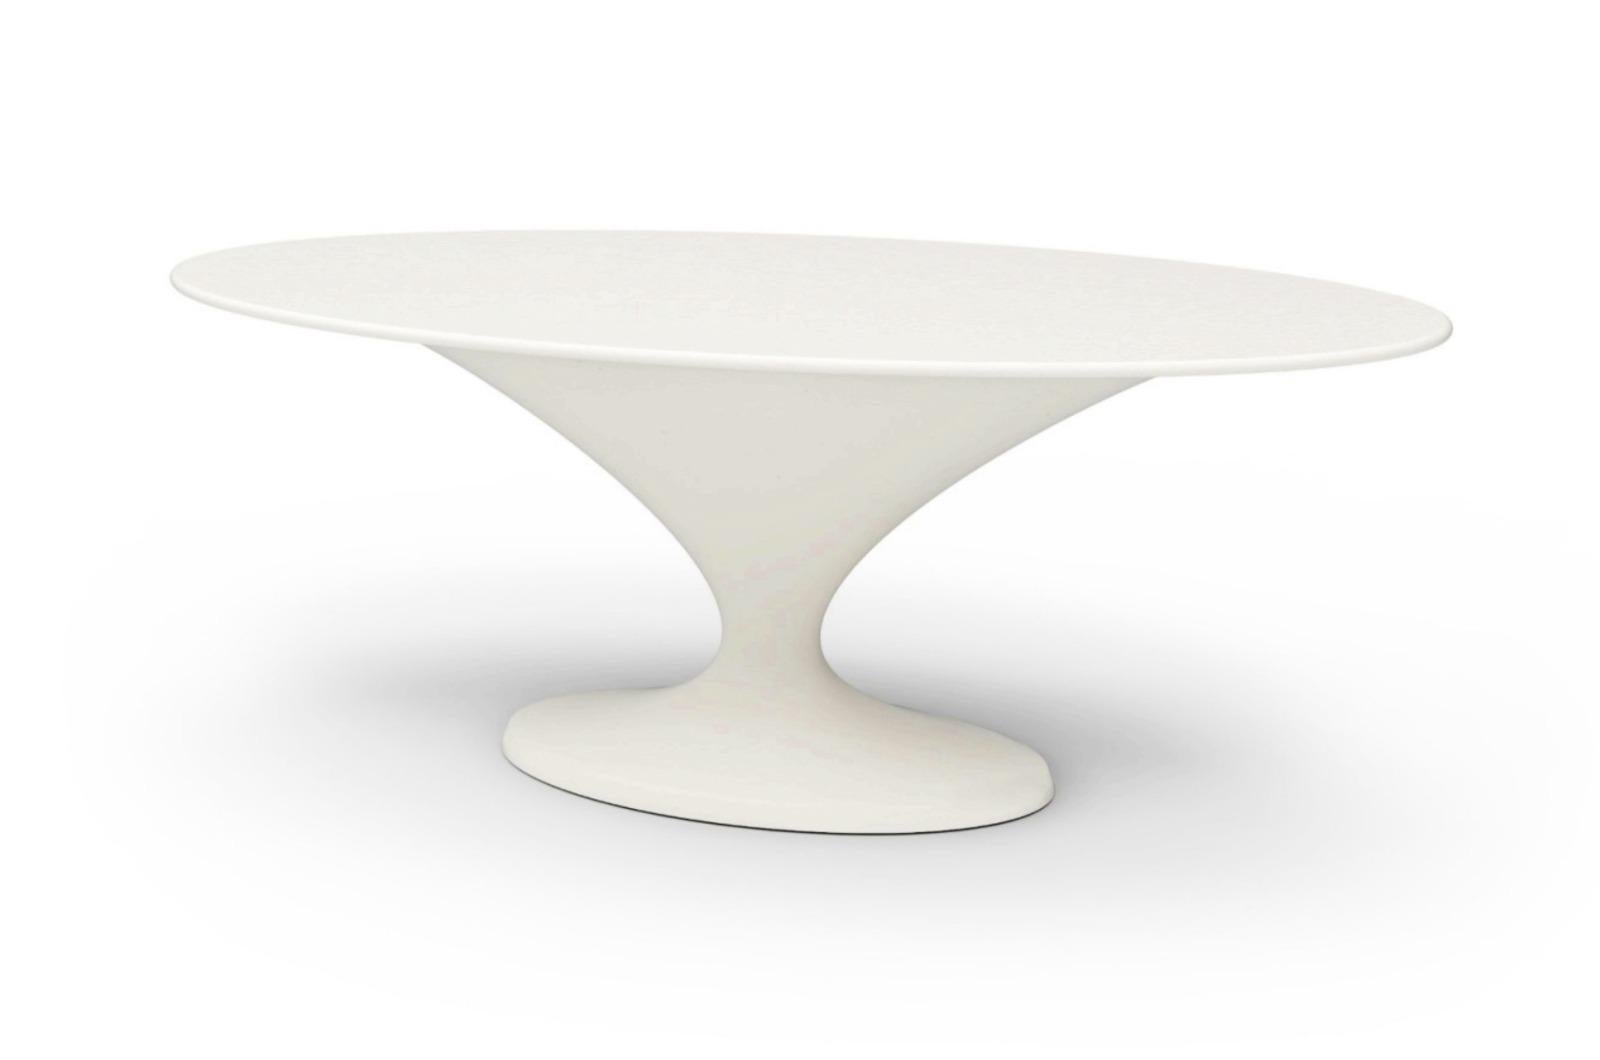 SUMMER 2024

Dining table

General information

Oval top, matte white lacquering.
Dimensions
200 x 120 x 75 cm /
78.7 x 47.2 x 29.5 in
Weight
125 kg / 275.6 lbs
Seats
6 to 8

Materials and colors

Structure: Resin reinforced with fiberglass,